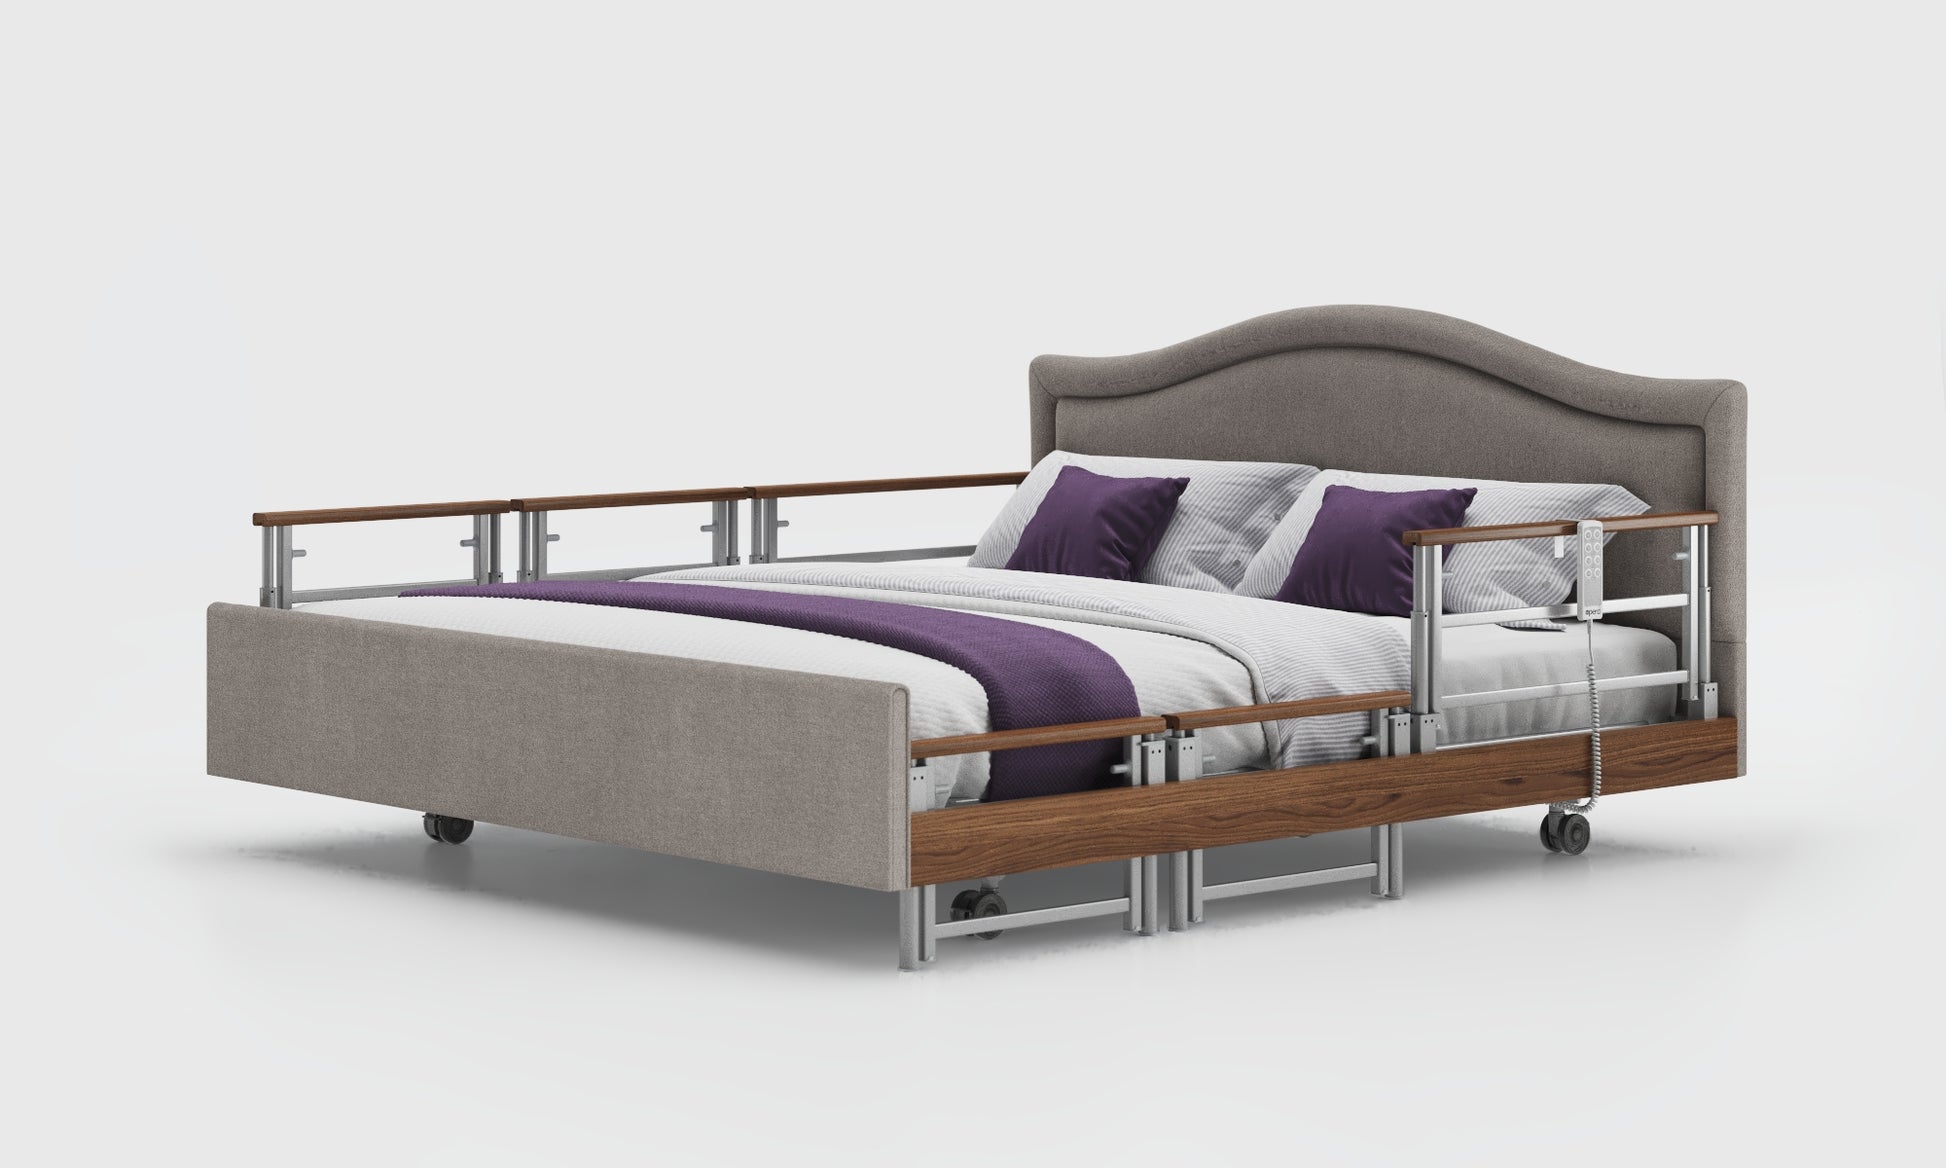 Signature comfort 6ft bed with walnut tri rails and pearl headboard in zinc material